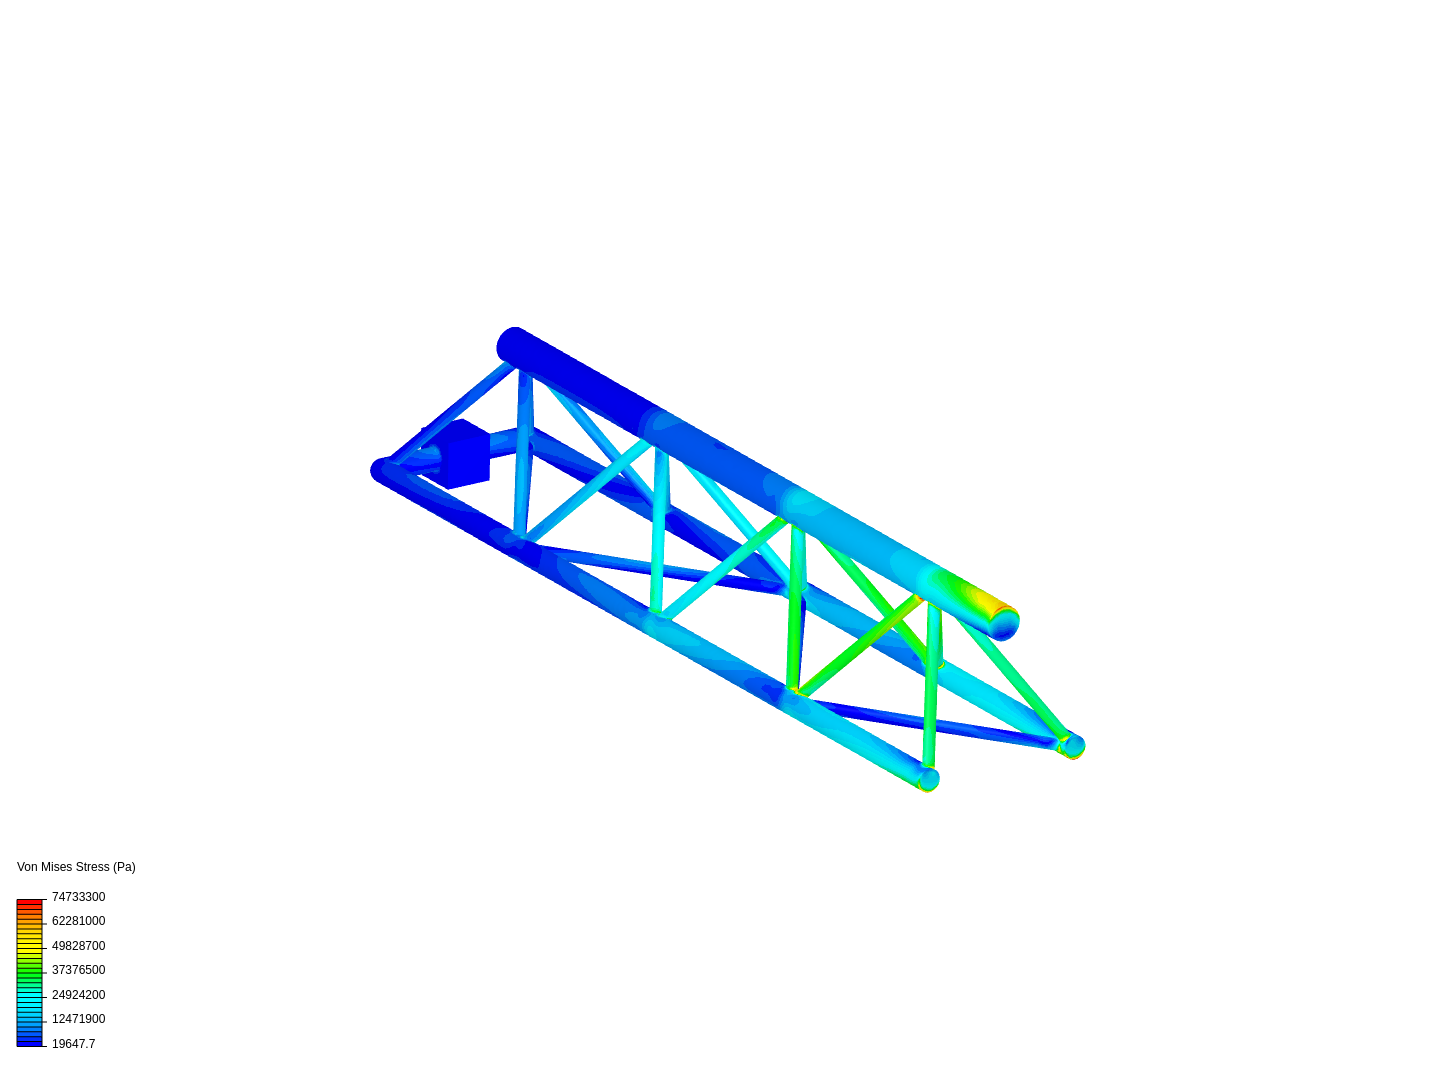 Linear Static Anlysis of a Crane image